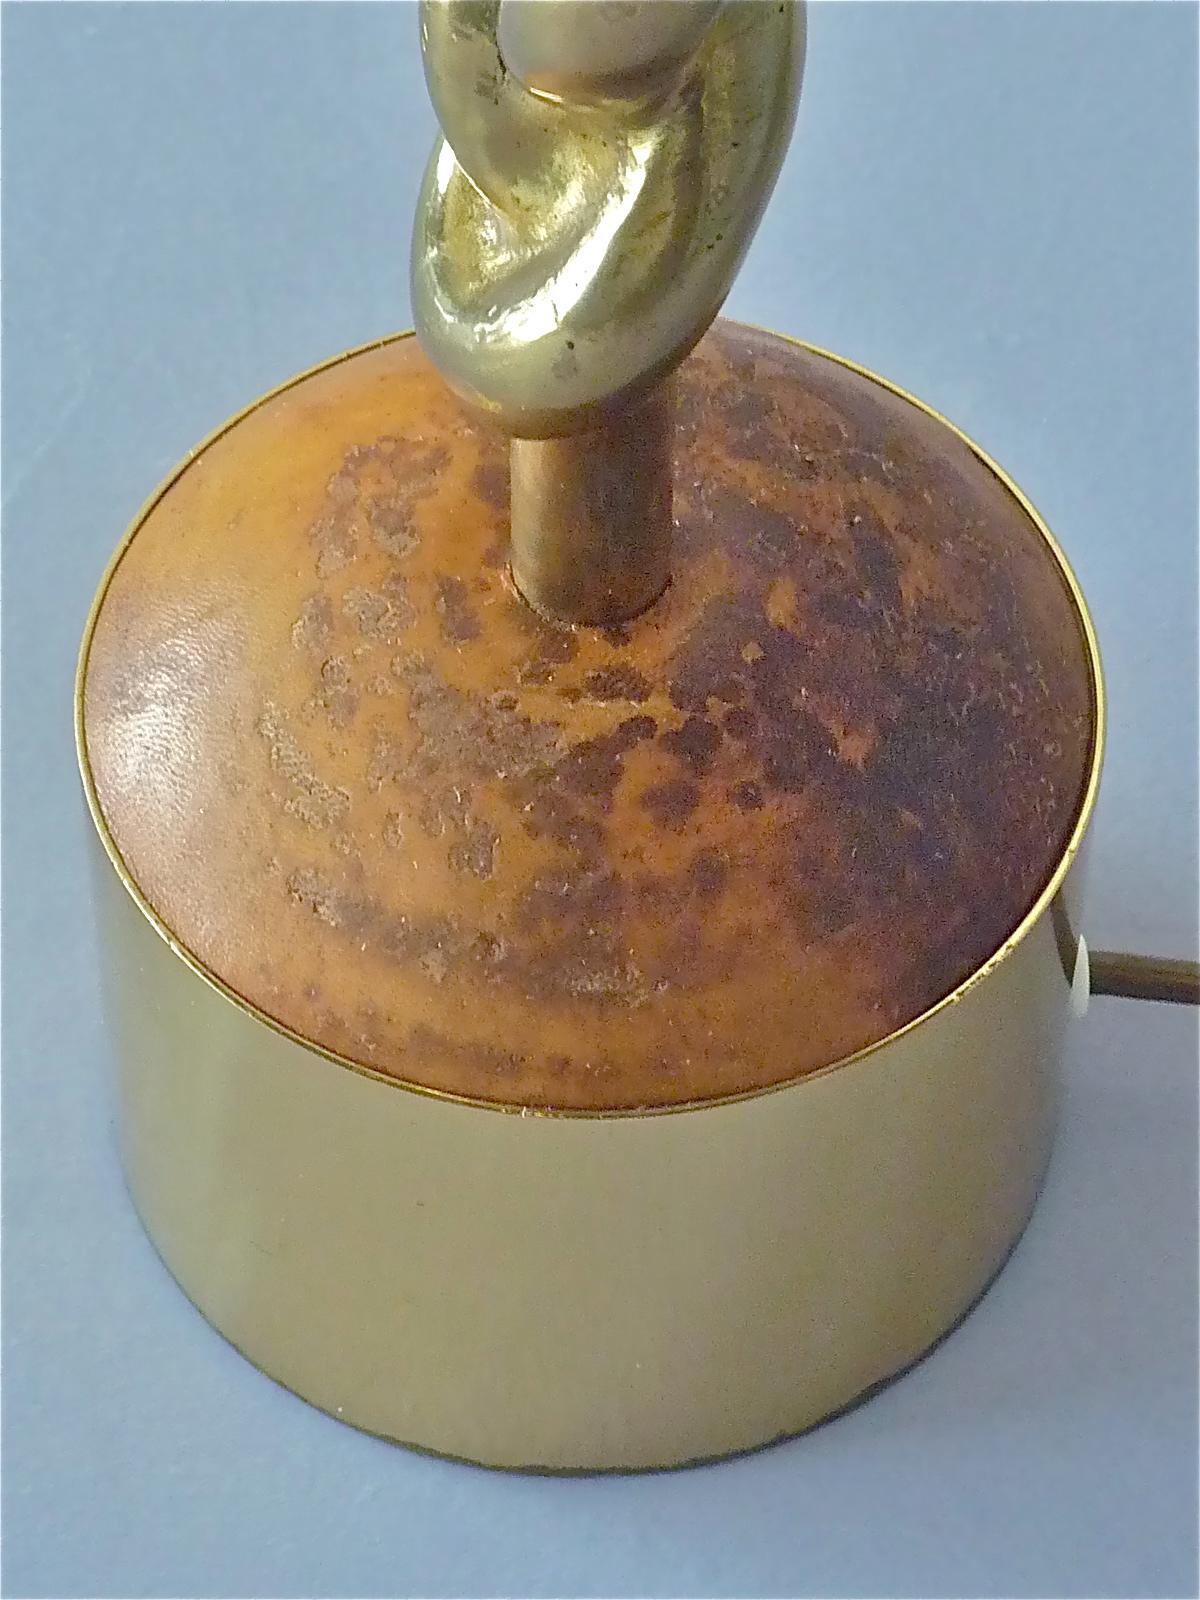 Sculptural Gilt Bronze Leather Knotted Table Lamp French 1970s Jansen Pergay Era For Sale 4